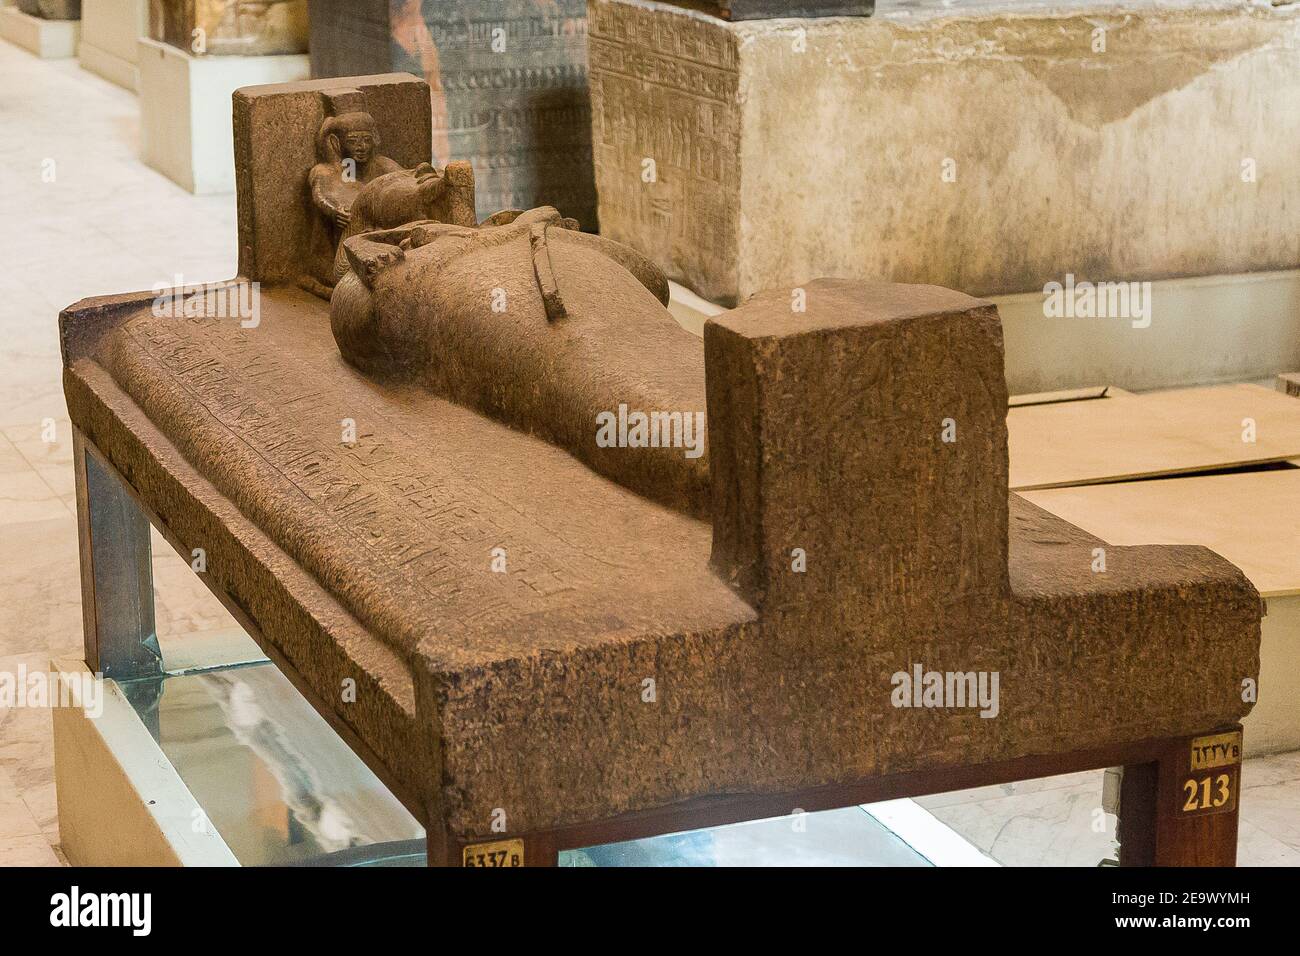 Egypt, Cairo, Egyptian Museum, granite outer sarcophagus of king Psusennes I, reused from king Merenptah. Found in the royal necropolis of Tanis. Stock Photo